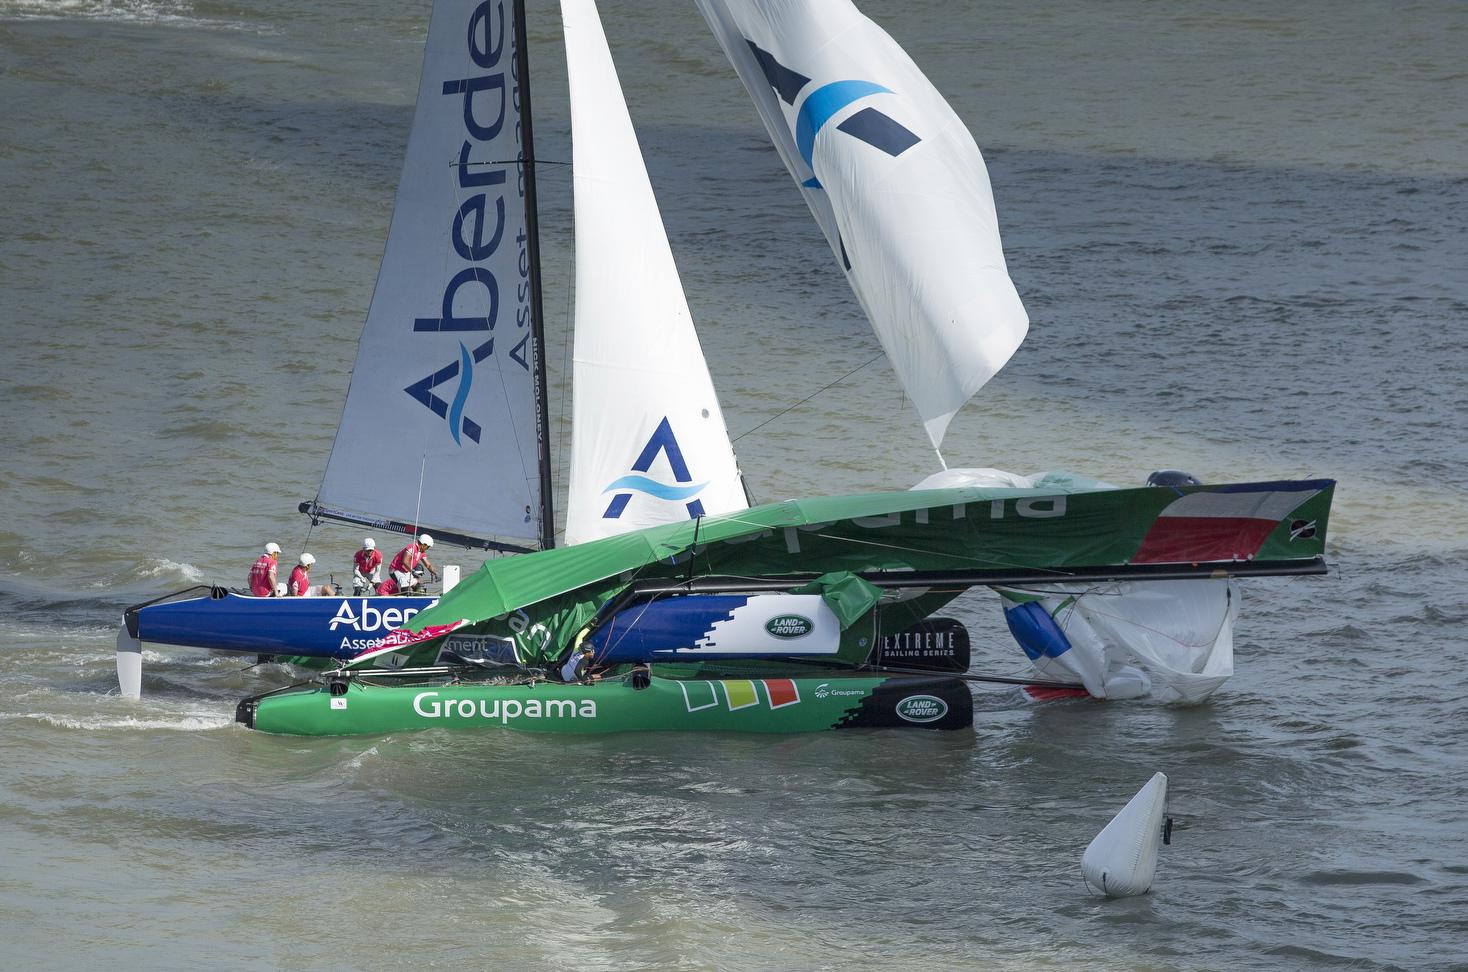 Serious crash but no serious injuries as Aberdeen Asset Management carves into potential French America’s Cup contender Franck Cammas’ Groupama in the opening 2014 Extreme Sailing Series regatta in Singapore